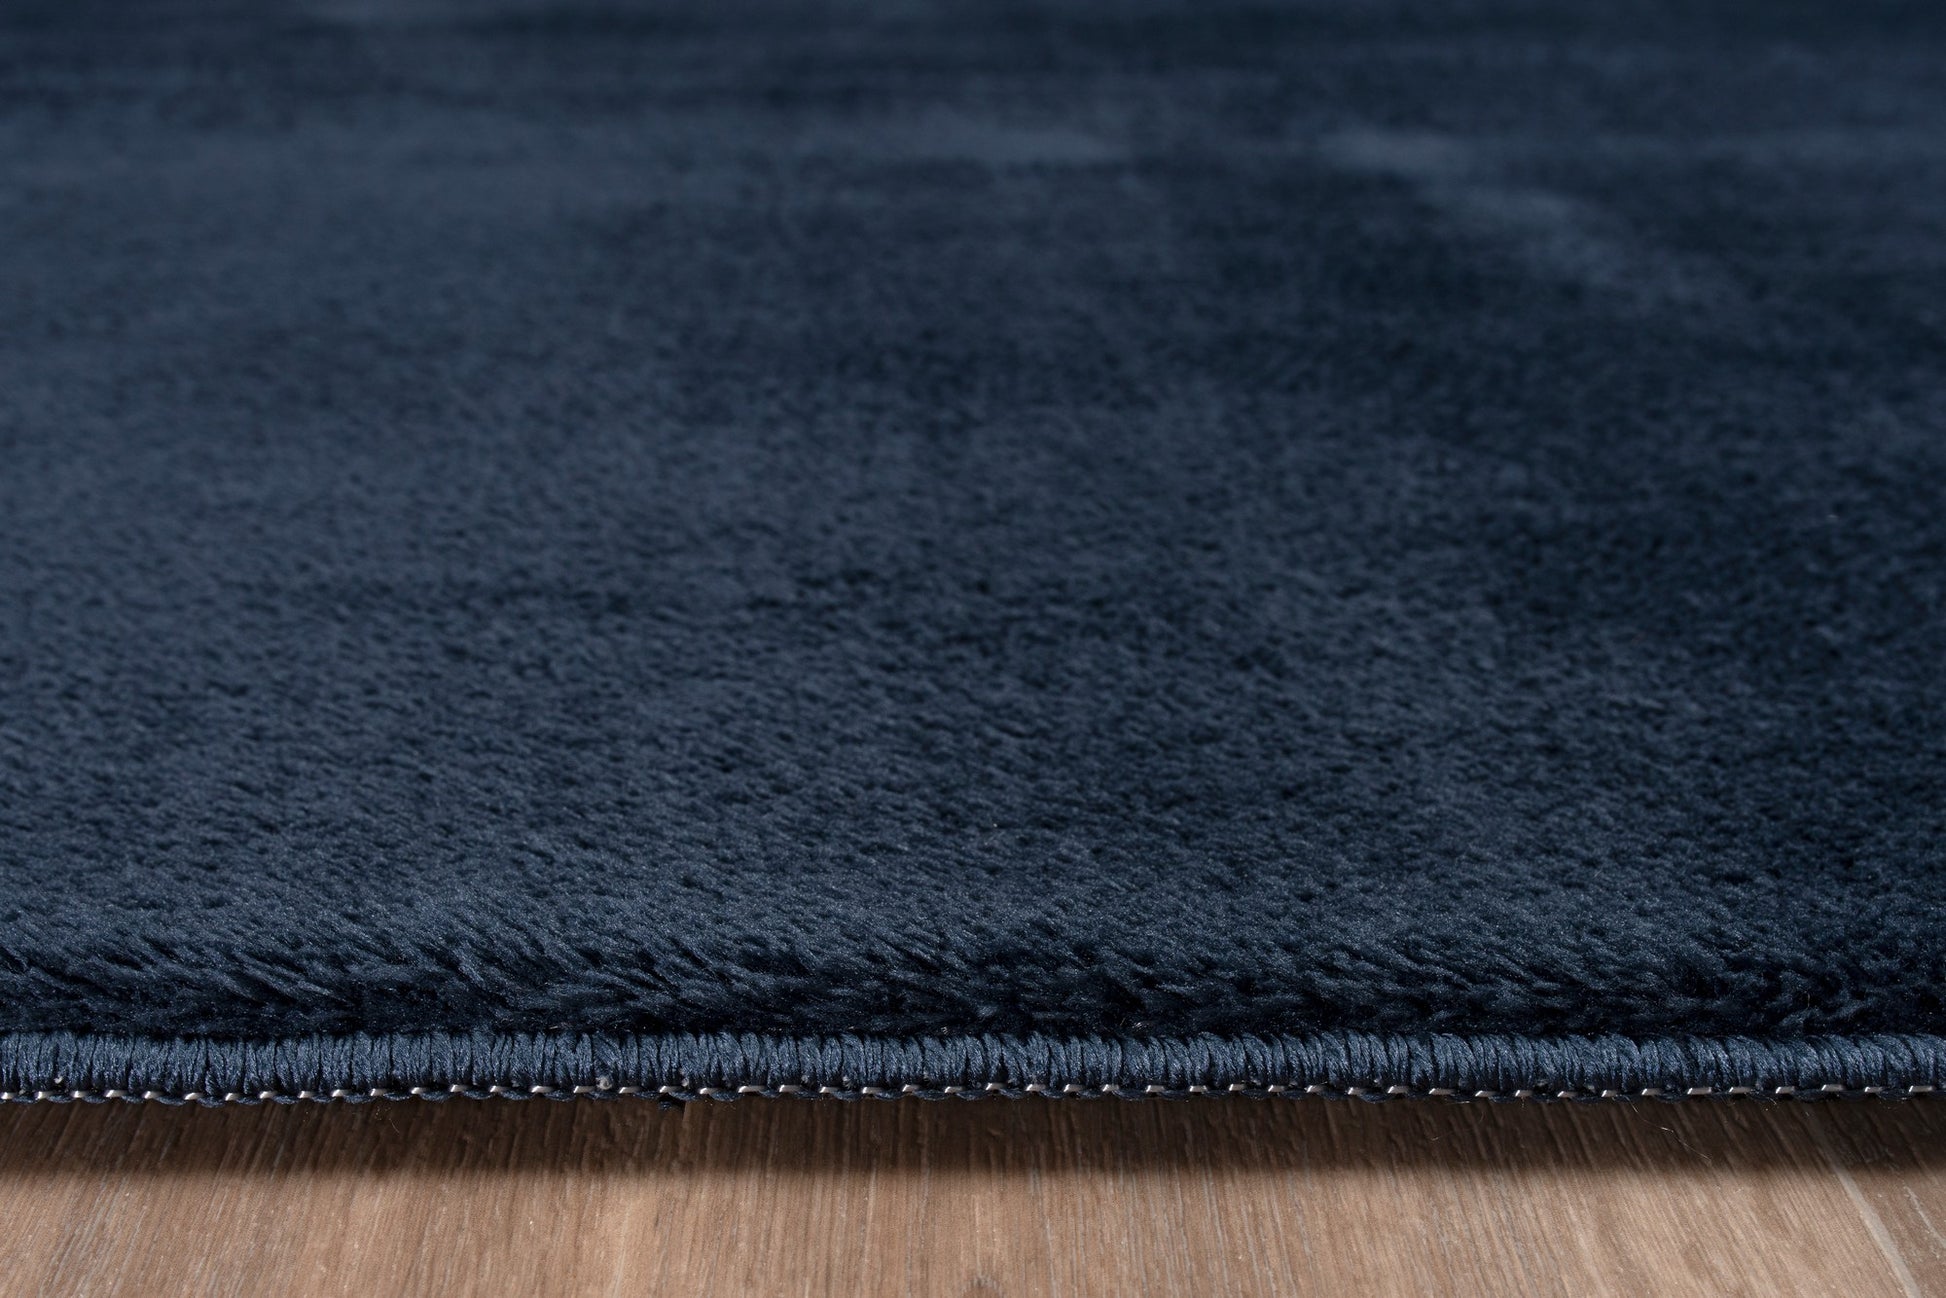 navy blue fluffy soft machine washable area rug for living room bedroom 2x8, 3x10, 2x10 ft Long Runner Rug, Hallway, Balcony, Entry Way, Kitchen, Stairs